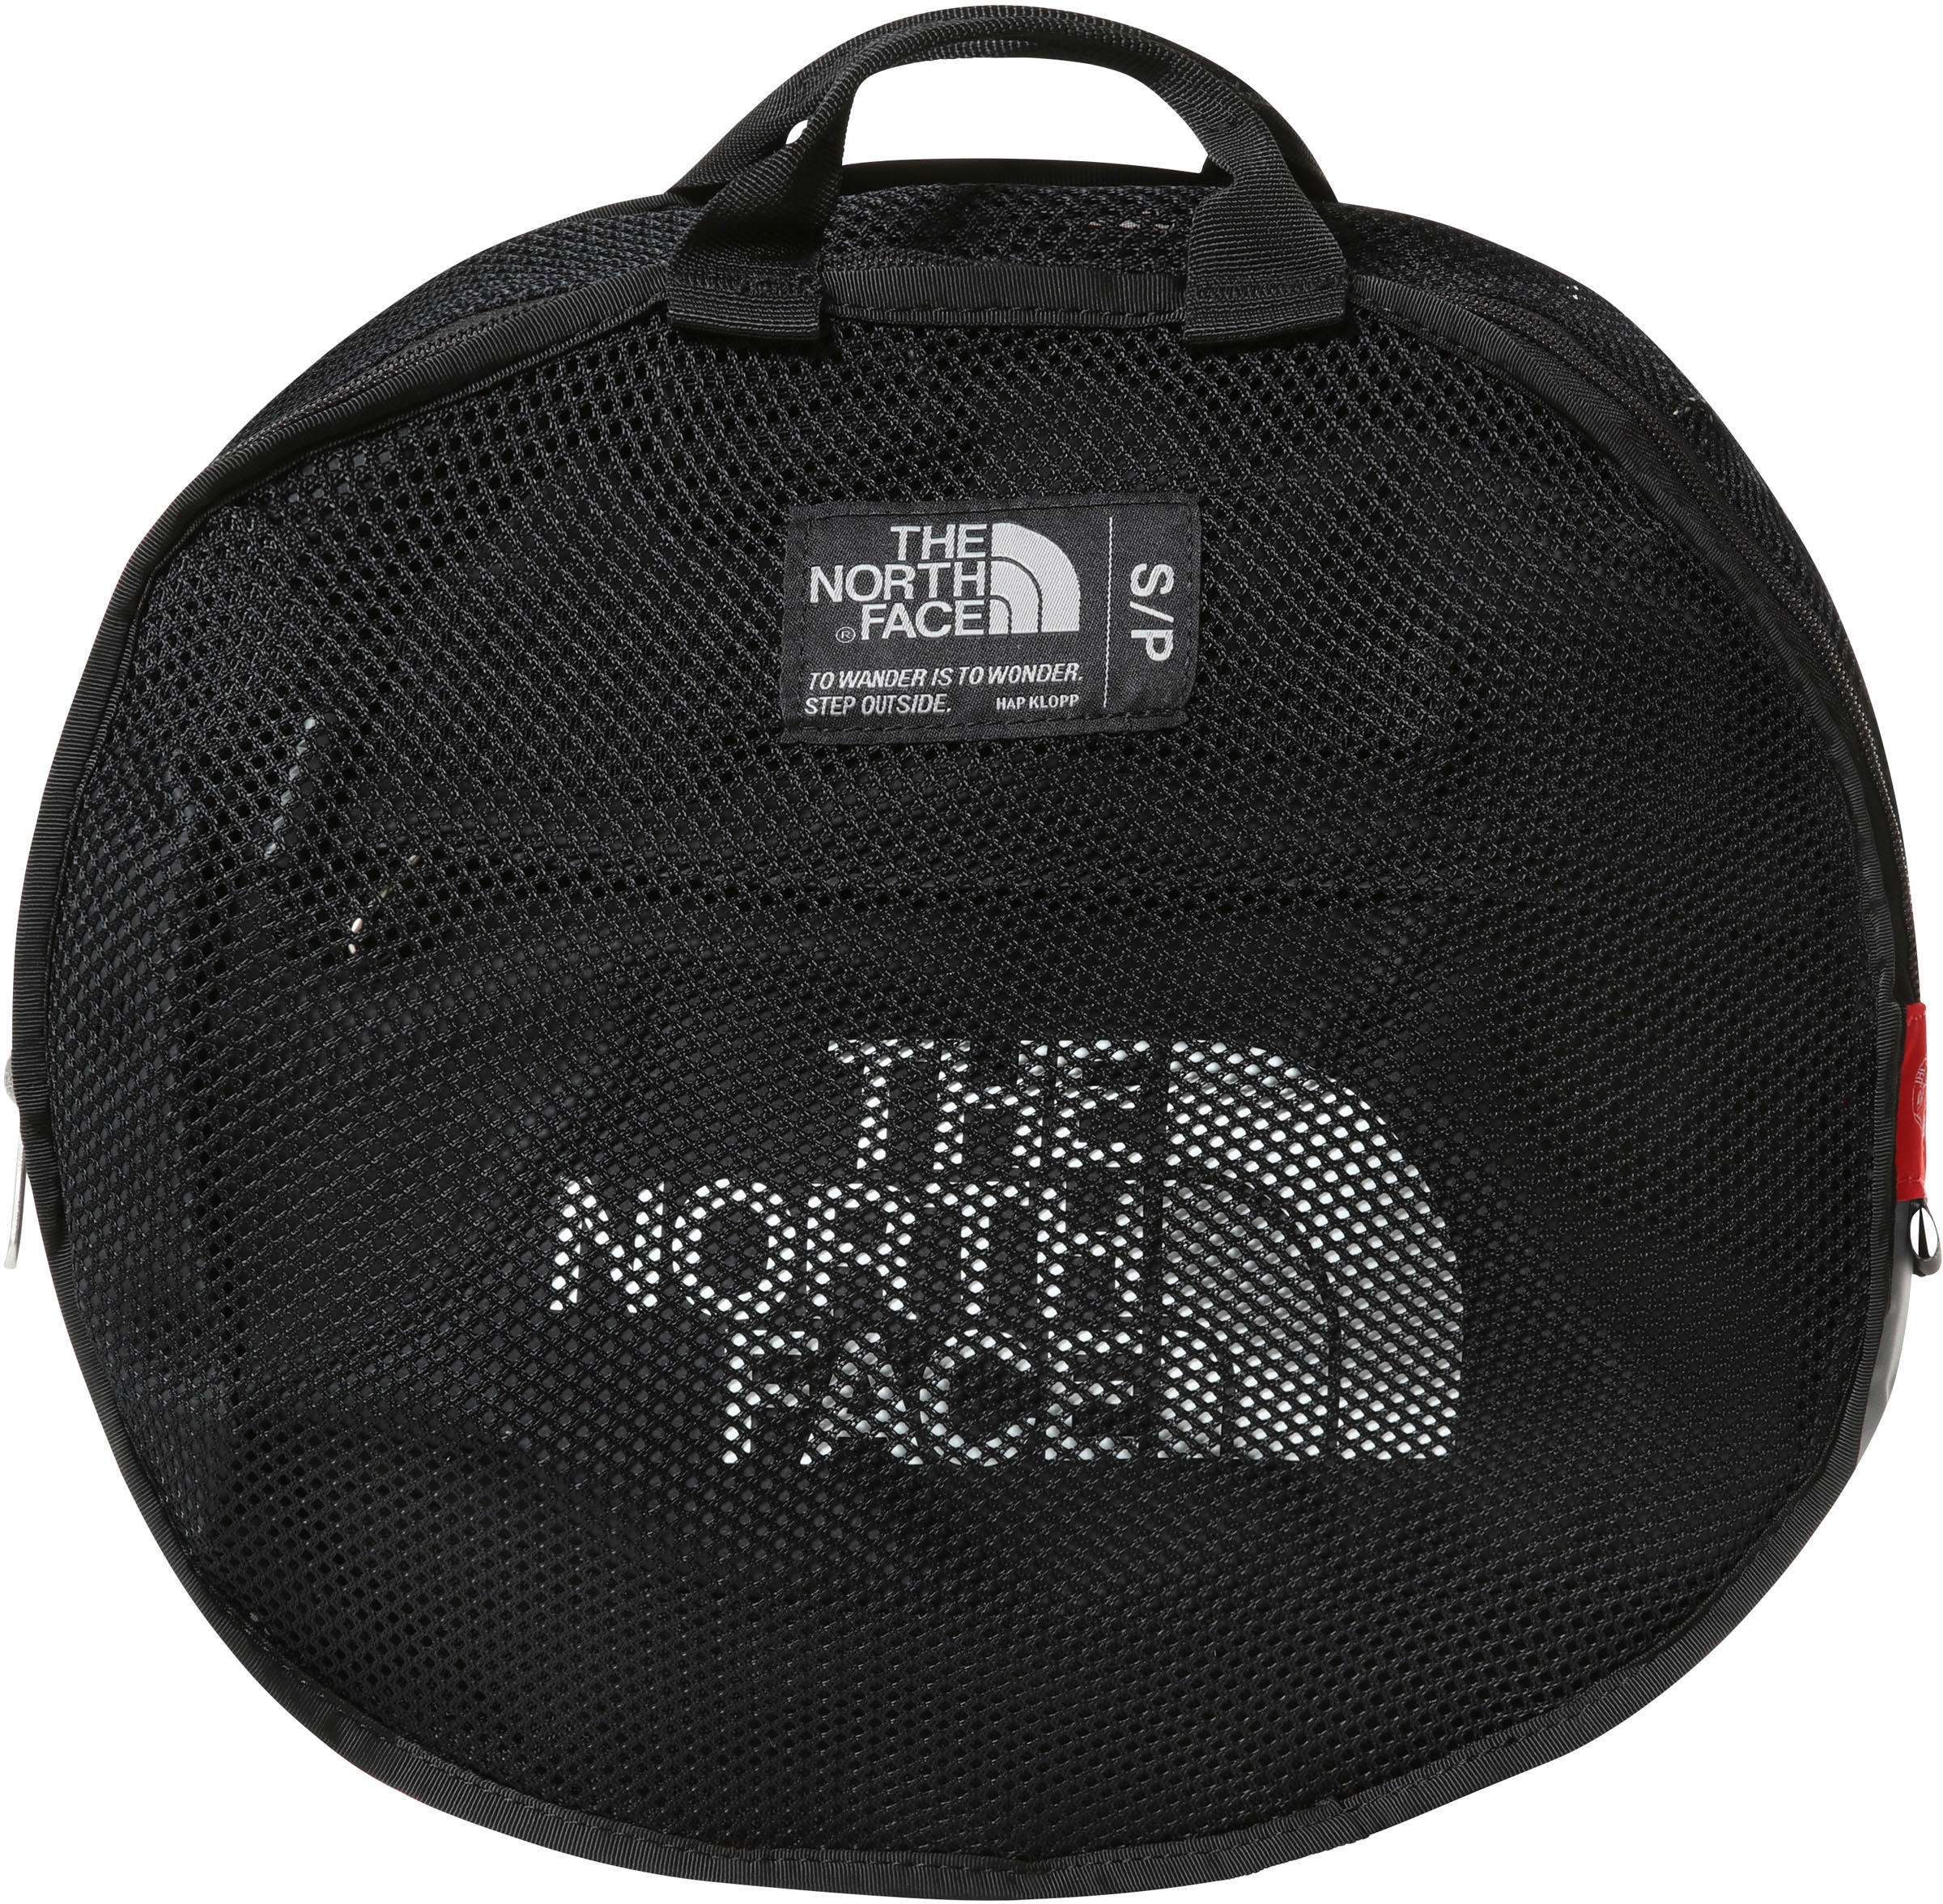 The North Face Reisetasche »BASE CAMP DUFFEL«, mit Logolabel